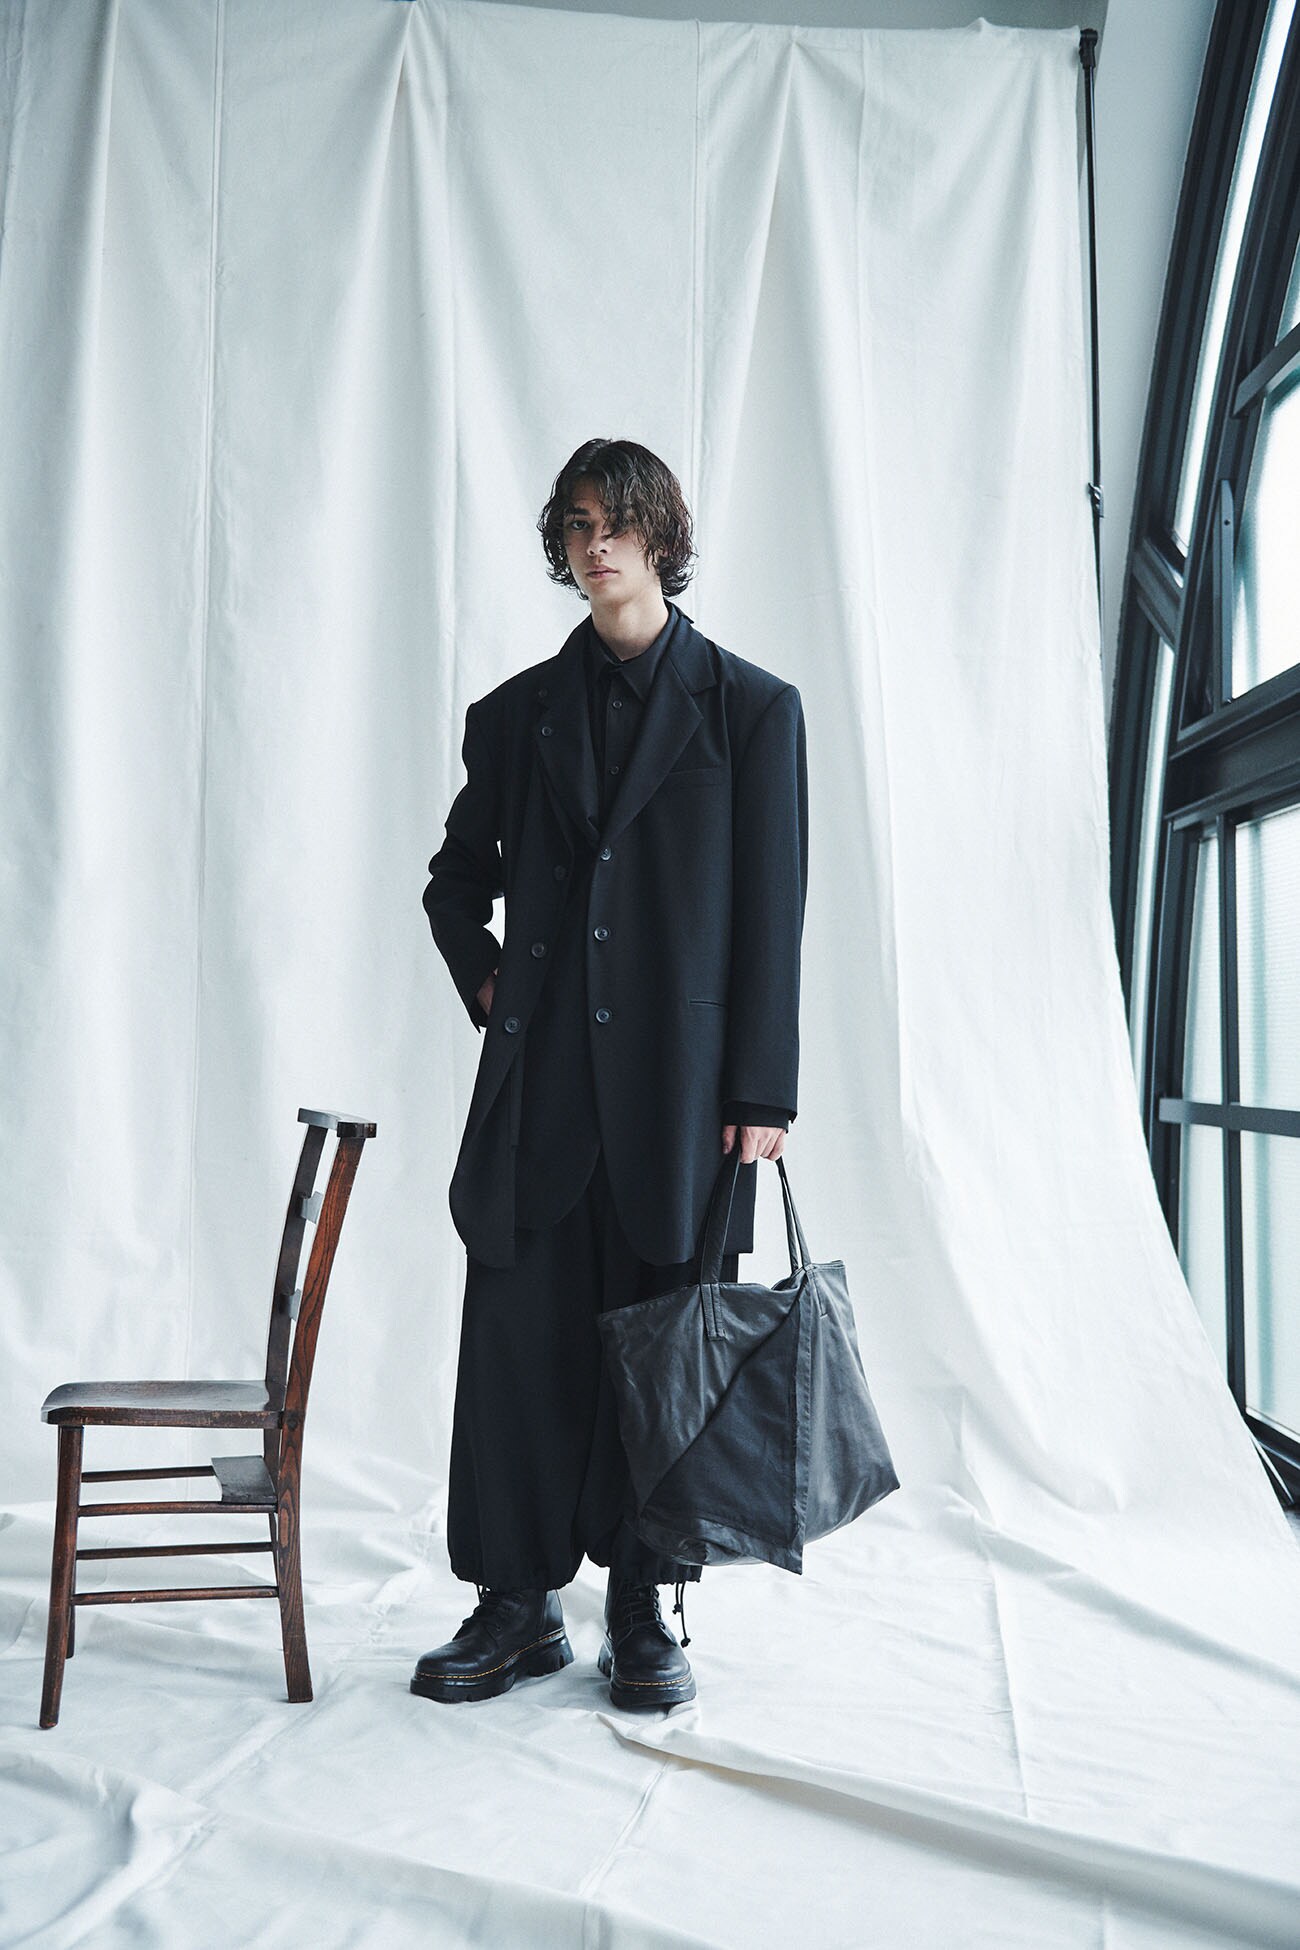 【3/2 12:00(JST) Release】PEEL TOTE（Leather）